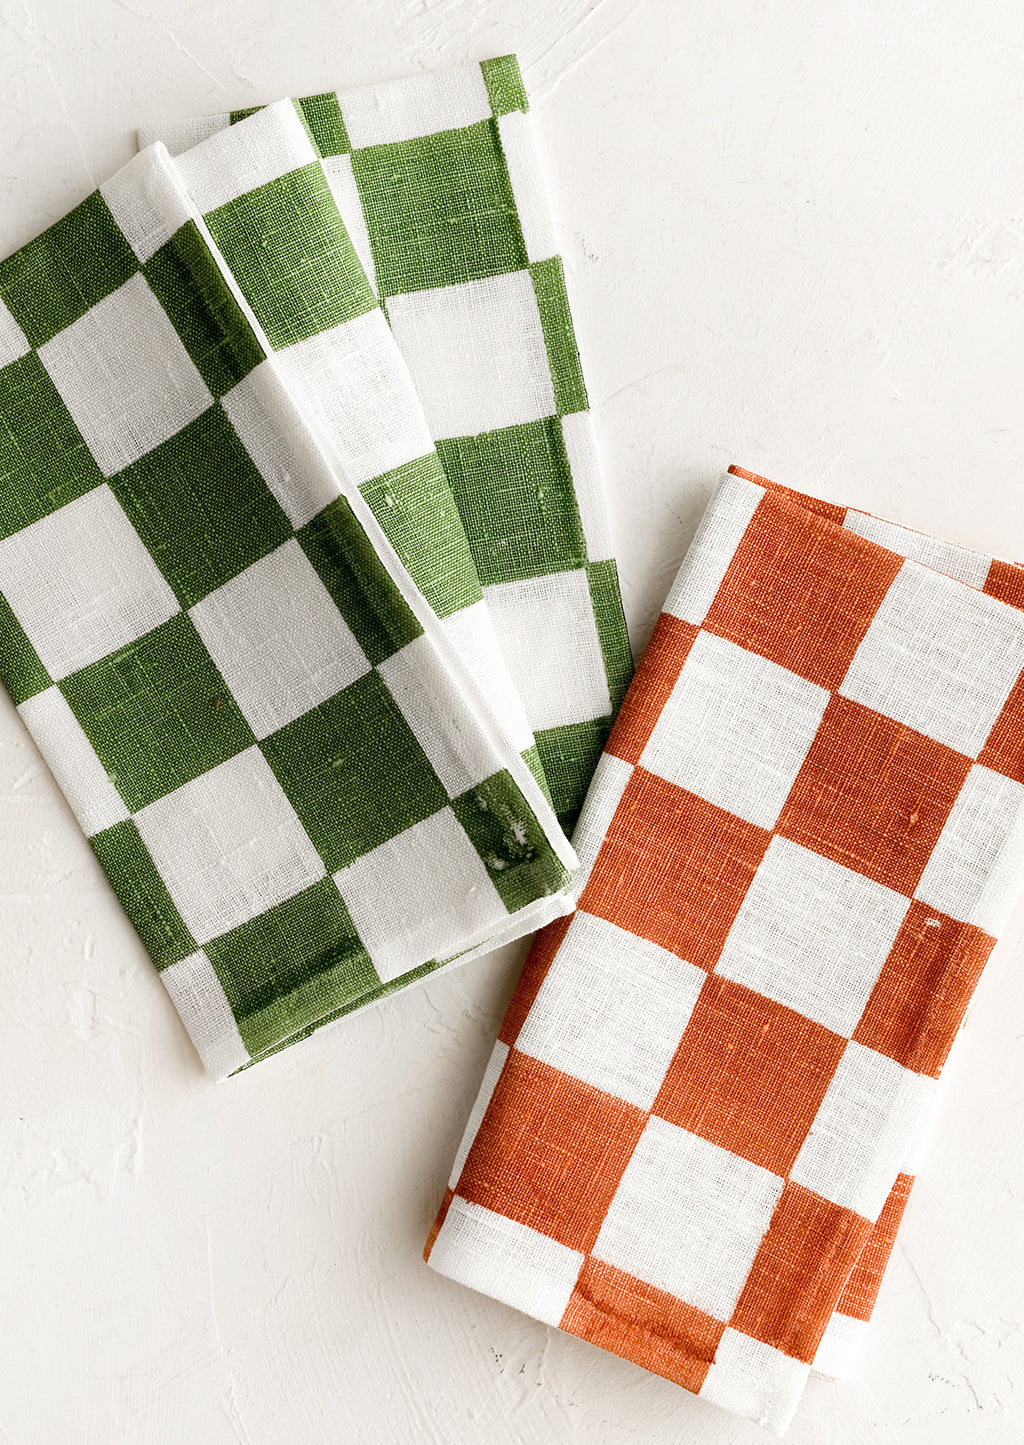 1: Checkered napkins in green and red.